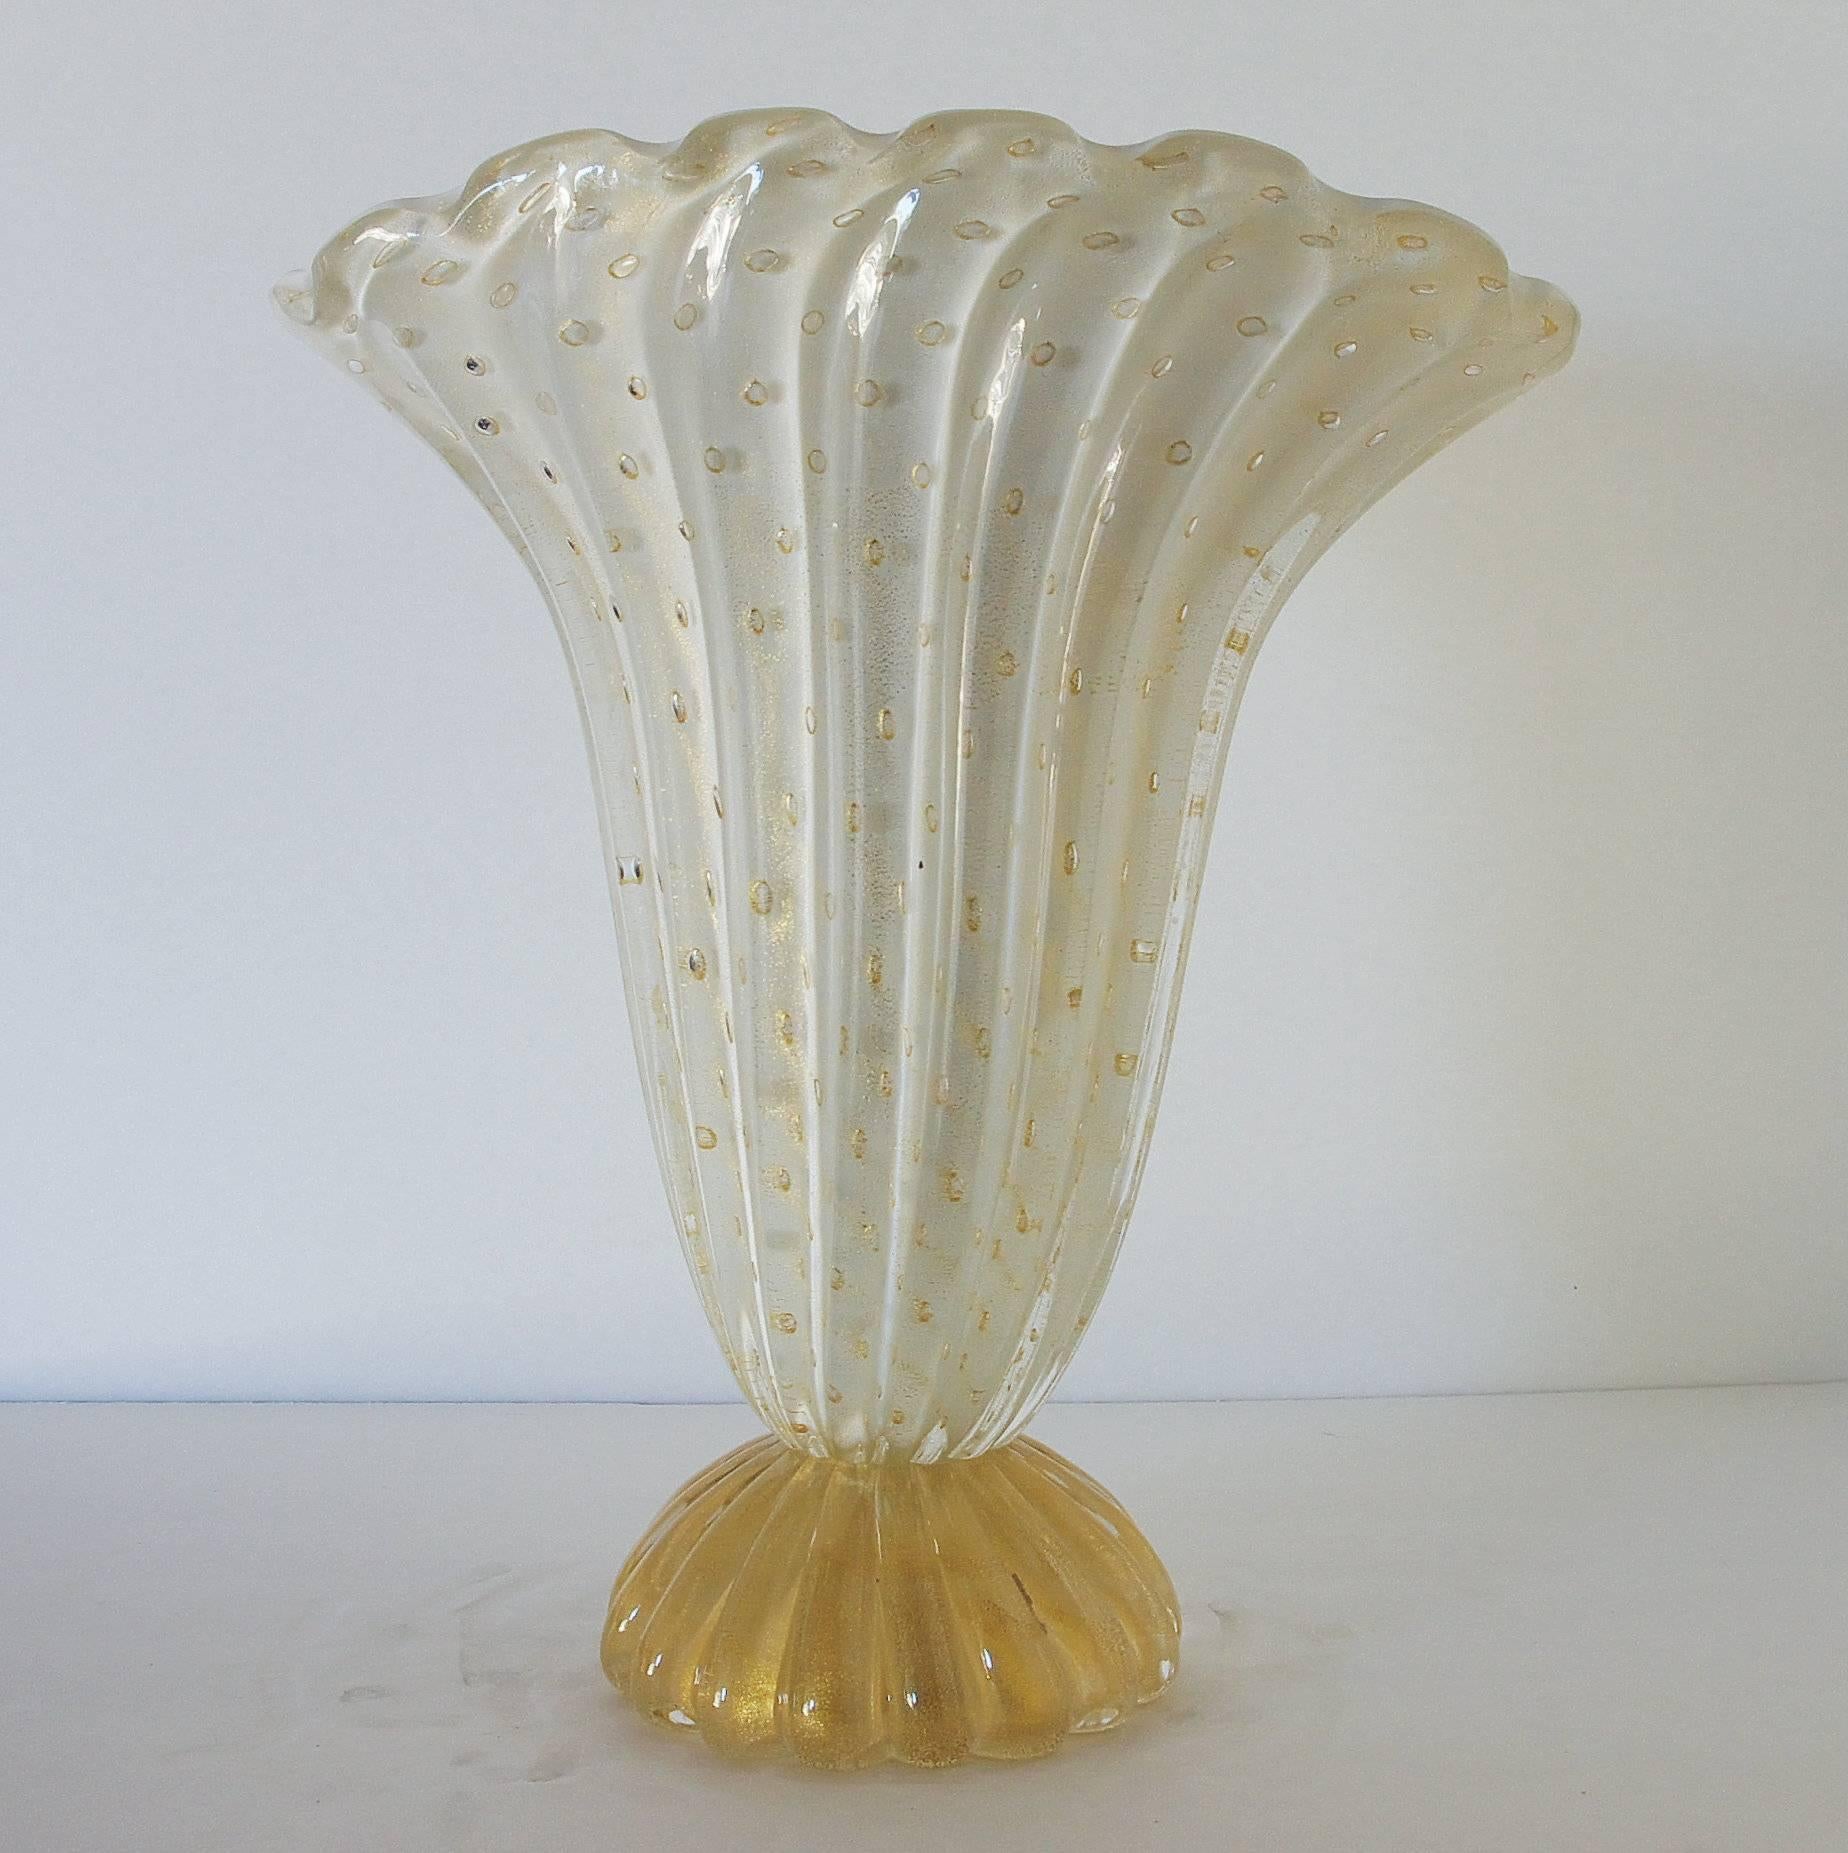 Vintage Italian white Murano glass vase blown in Bollicine technique (little bubbles) and infused with gold flecks
Made in Italy in the 1960’s
Height: 15 inches / Width: 12 inches / Depth: 8 inches 
1 in stock in Palm Springs currently ON 40% OFF